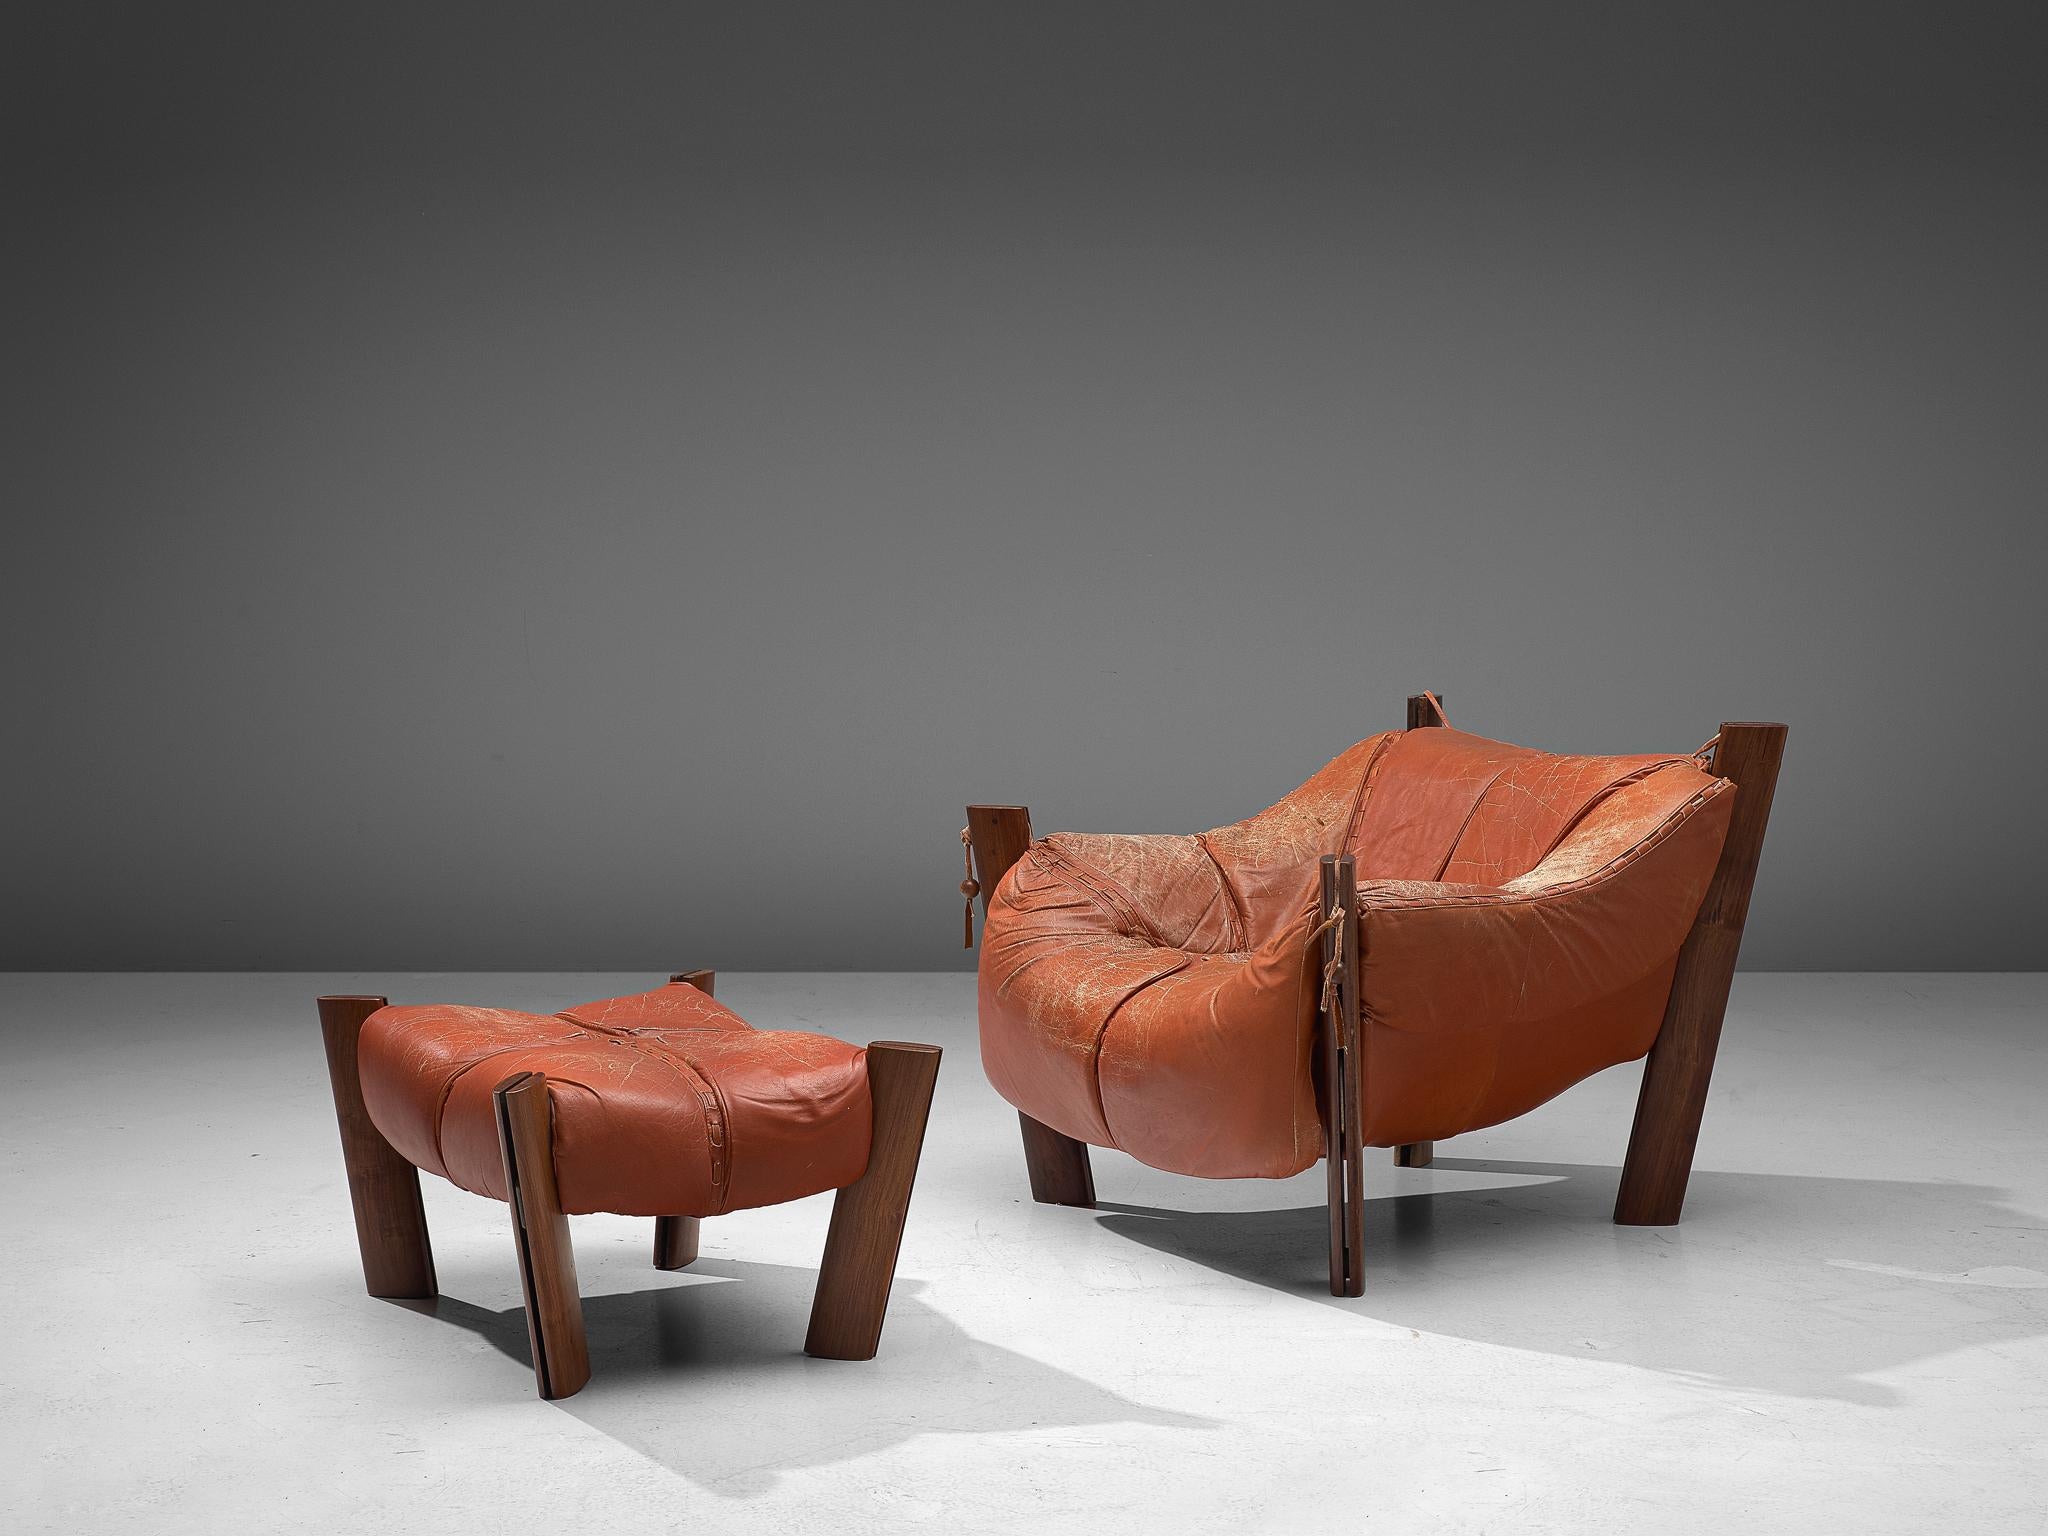 Percival Lafer, lounge chair with ottoman model MP-211, in wood and leather, Brazil, 1974.

Lounge chair by Brazilian designer Percival Lafer. This sofa consists of a solid wood base in which the leather seating 'hangs'. Soft cushions are folded